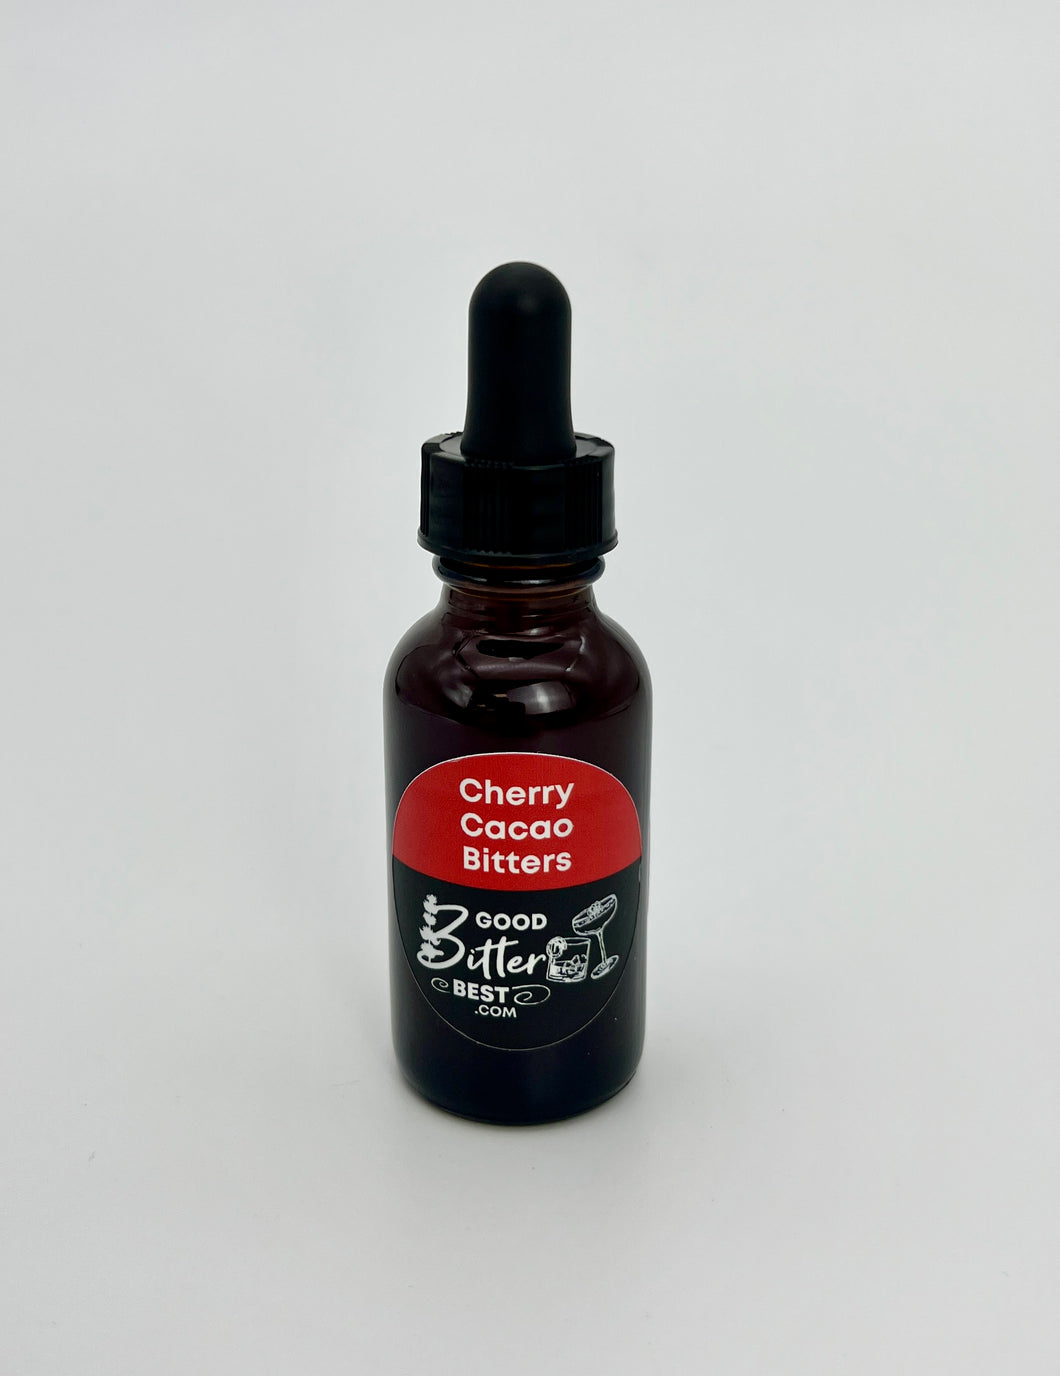 Cherry Cacao Bitters